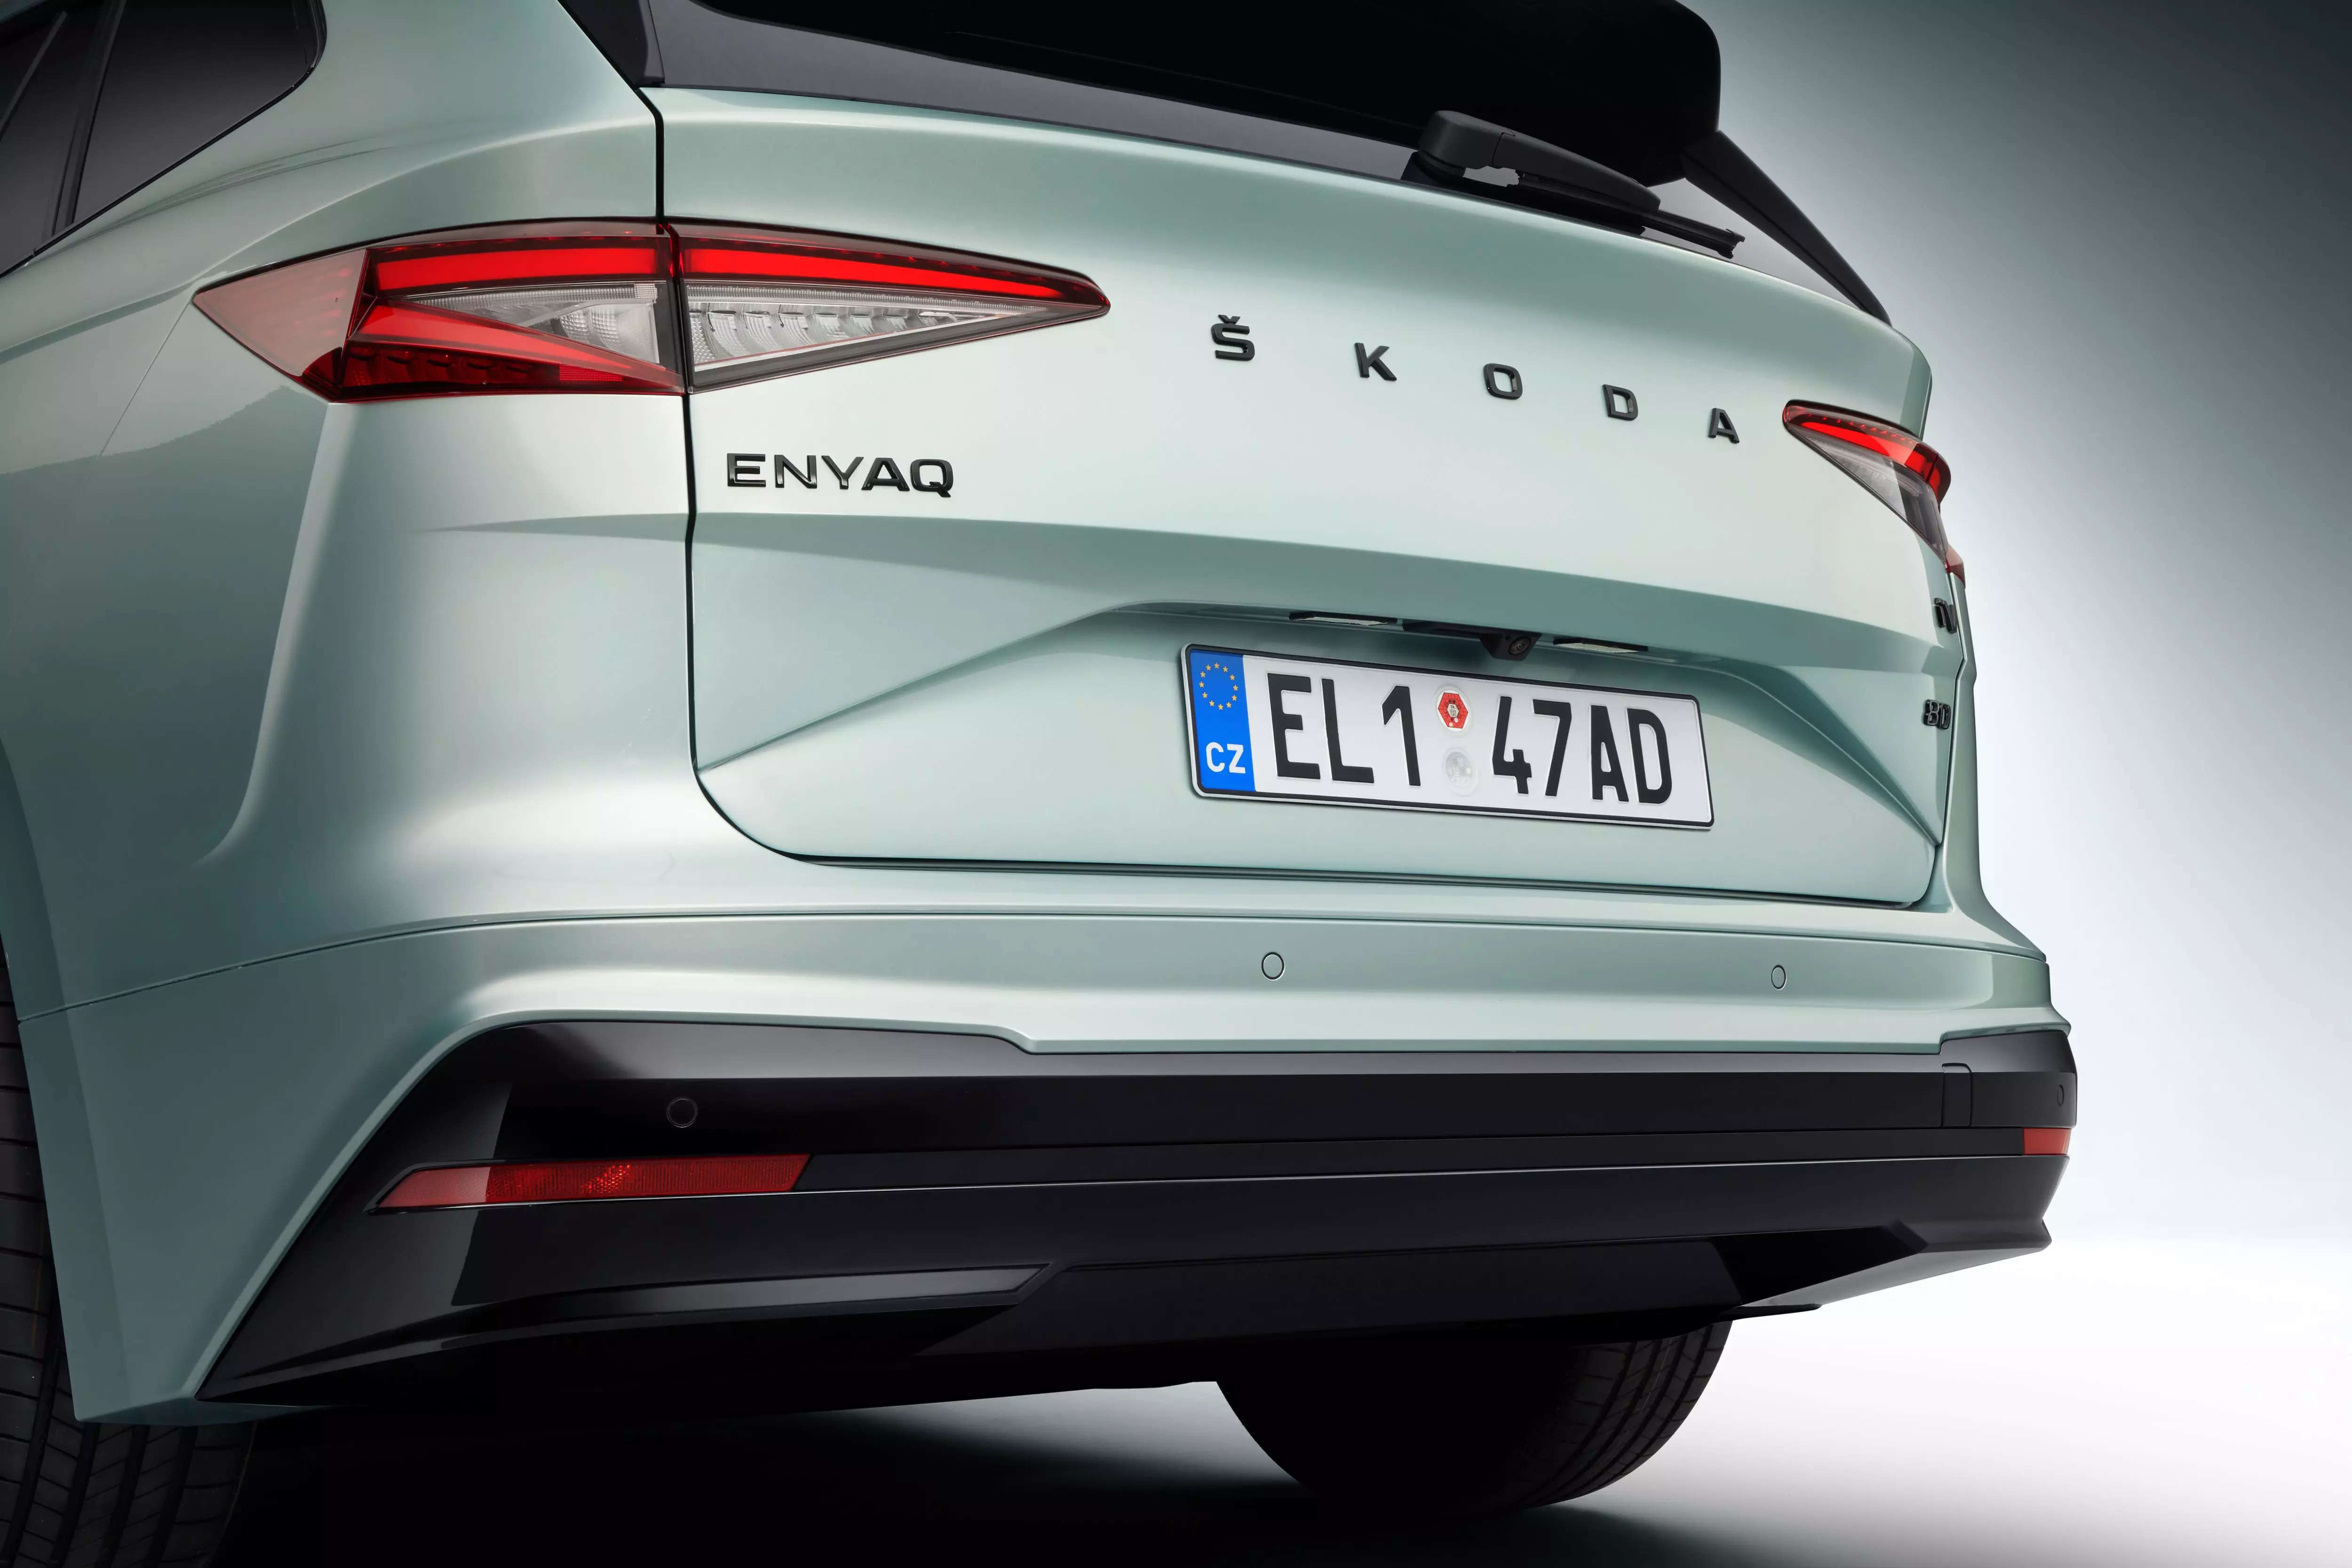  Skoda Enyaq iV was globally debuted in September 2022 as the first dedicated EV offering based on the Volkswagen Group MEB platform.